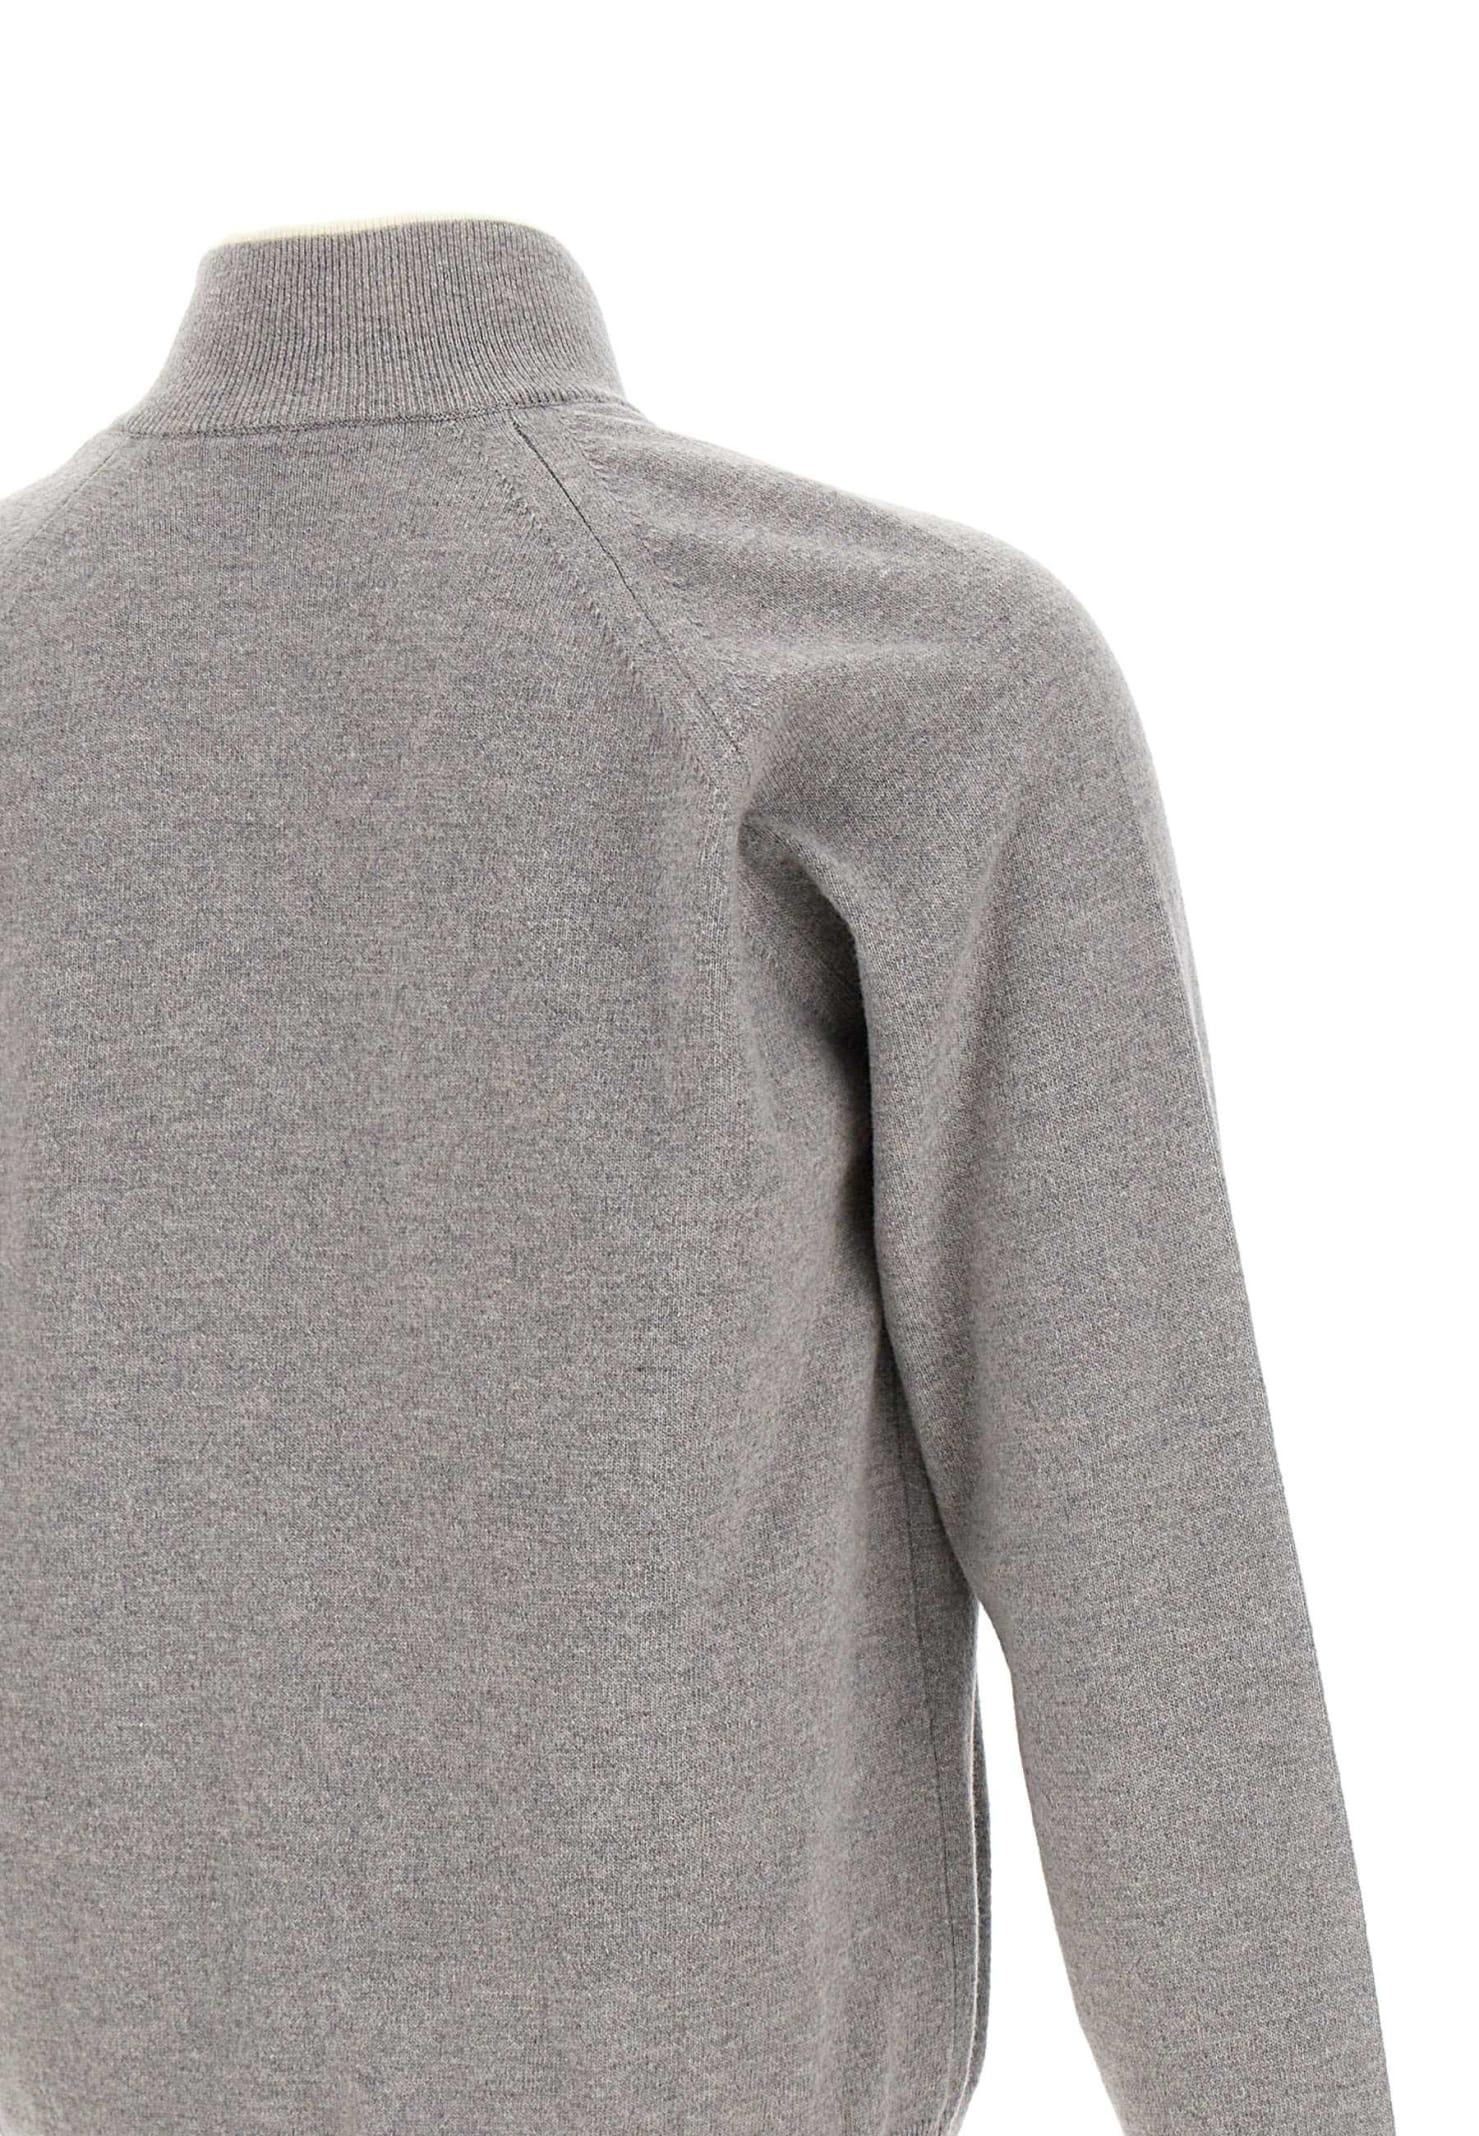 Mens Clothing Sweaters and knitwear Turtlenecks Save 25% Eleventy Mens 979ma0333mag2602914 Grey Wool Sweater in Grey for Men 